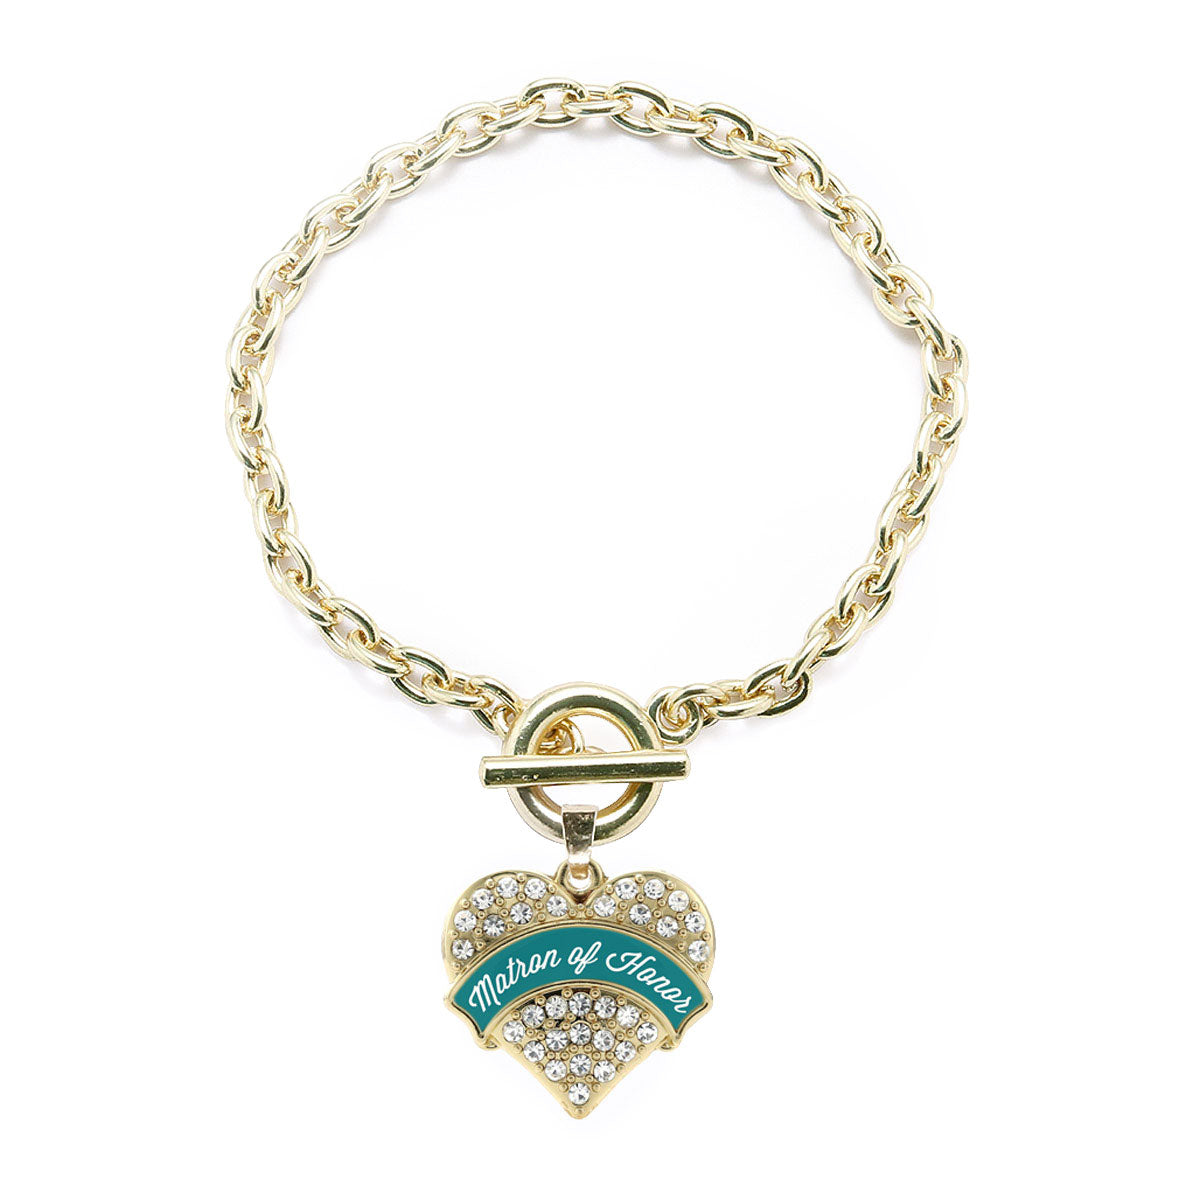 Gold Dark Teal Matron of Honor Pave Heart Charm Toggle Bracelet